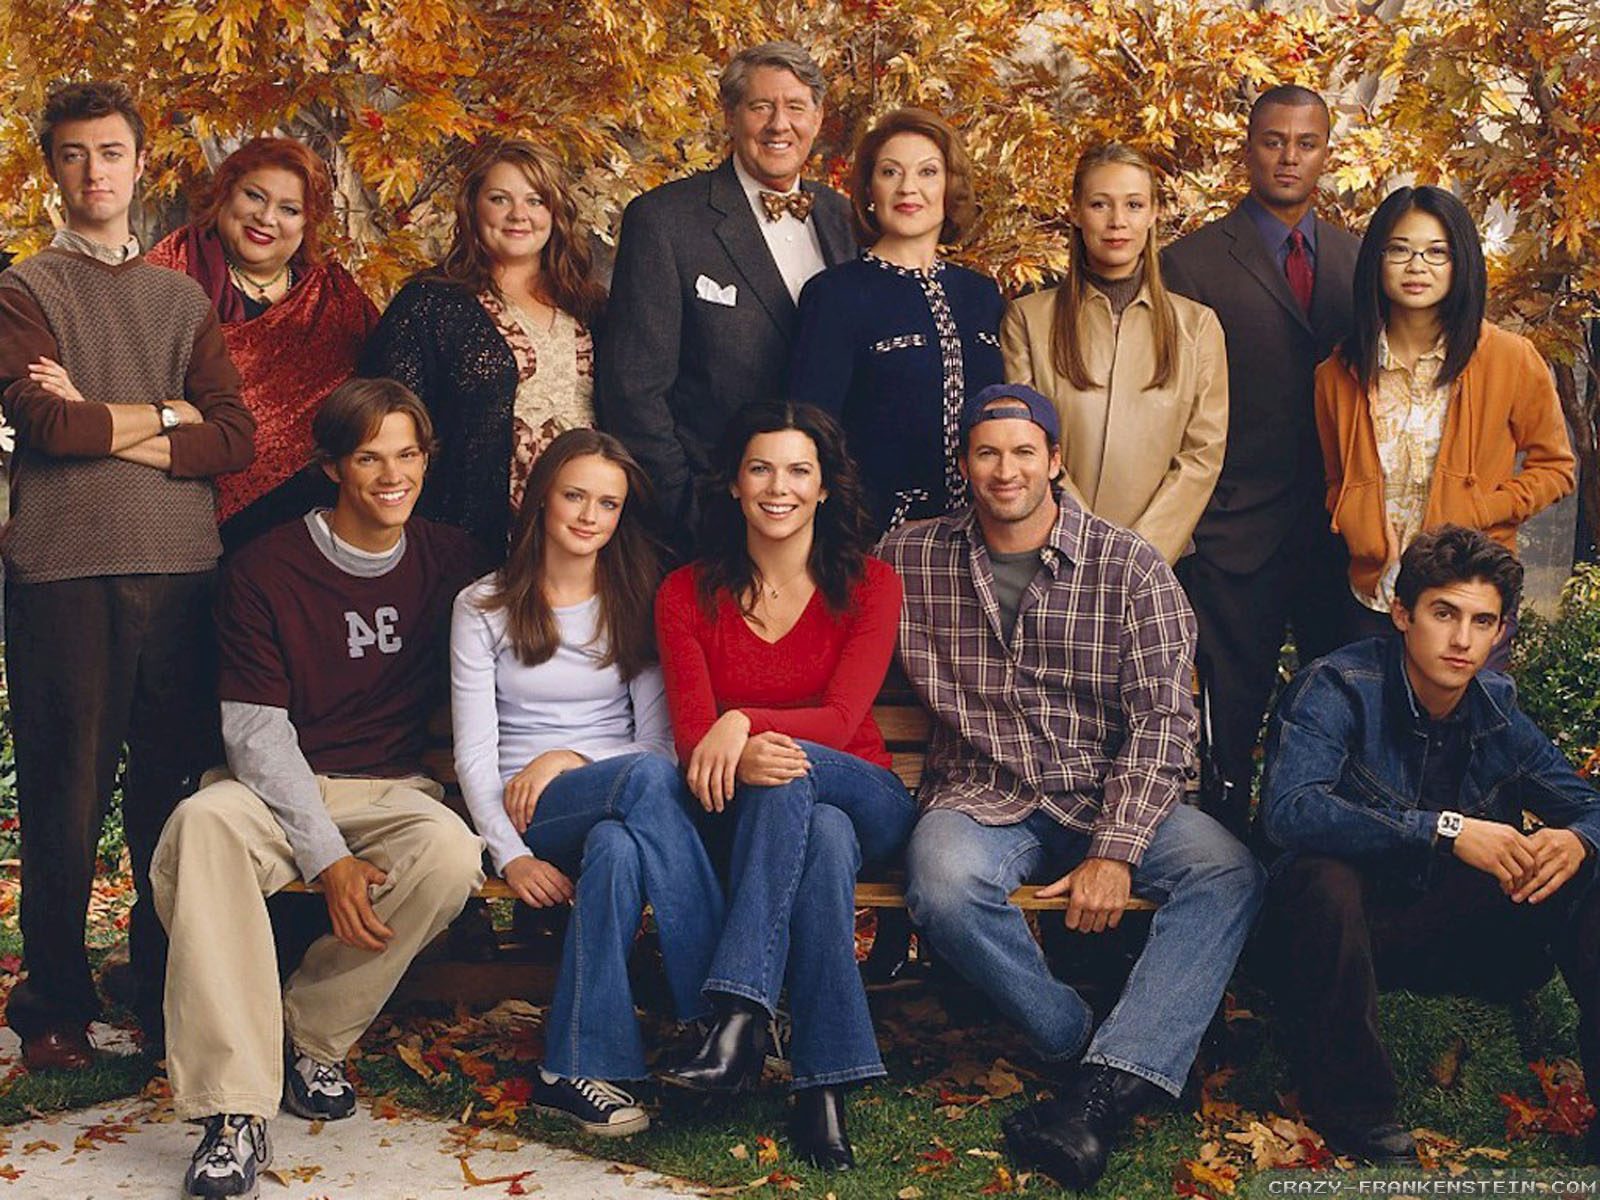 ‘gilmore girls: a year in the life’ premiere date announced